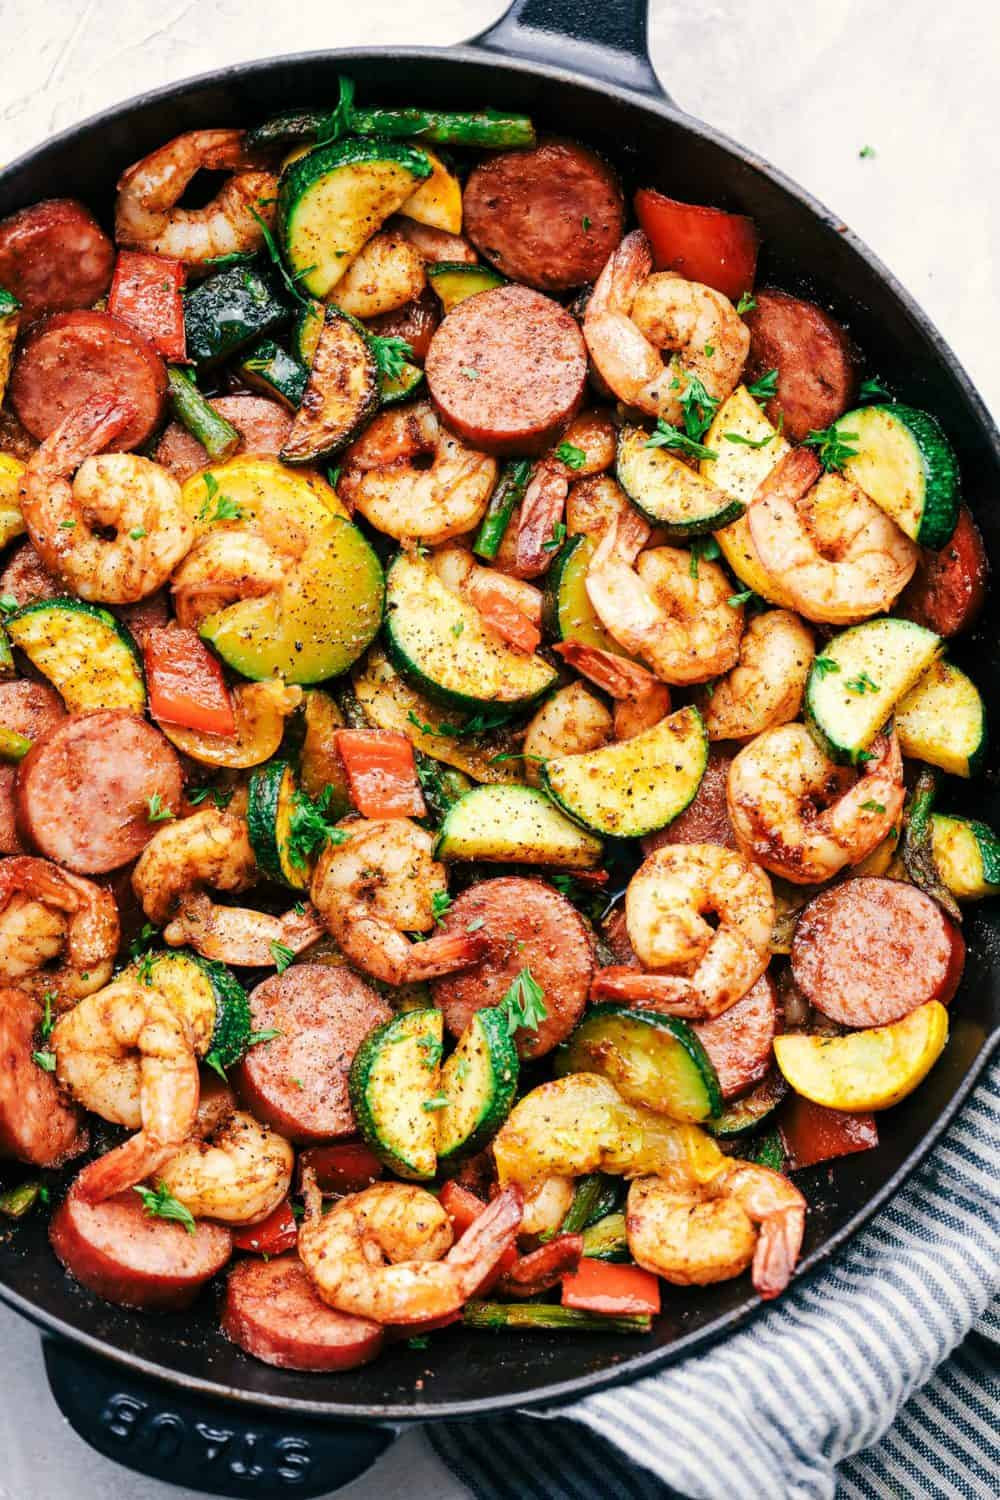 Smoked Sausage Recipes For Dinner
 Cajun Shrimp and Sausage Ve able Skillet